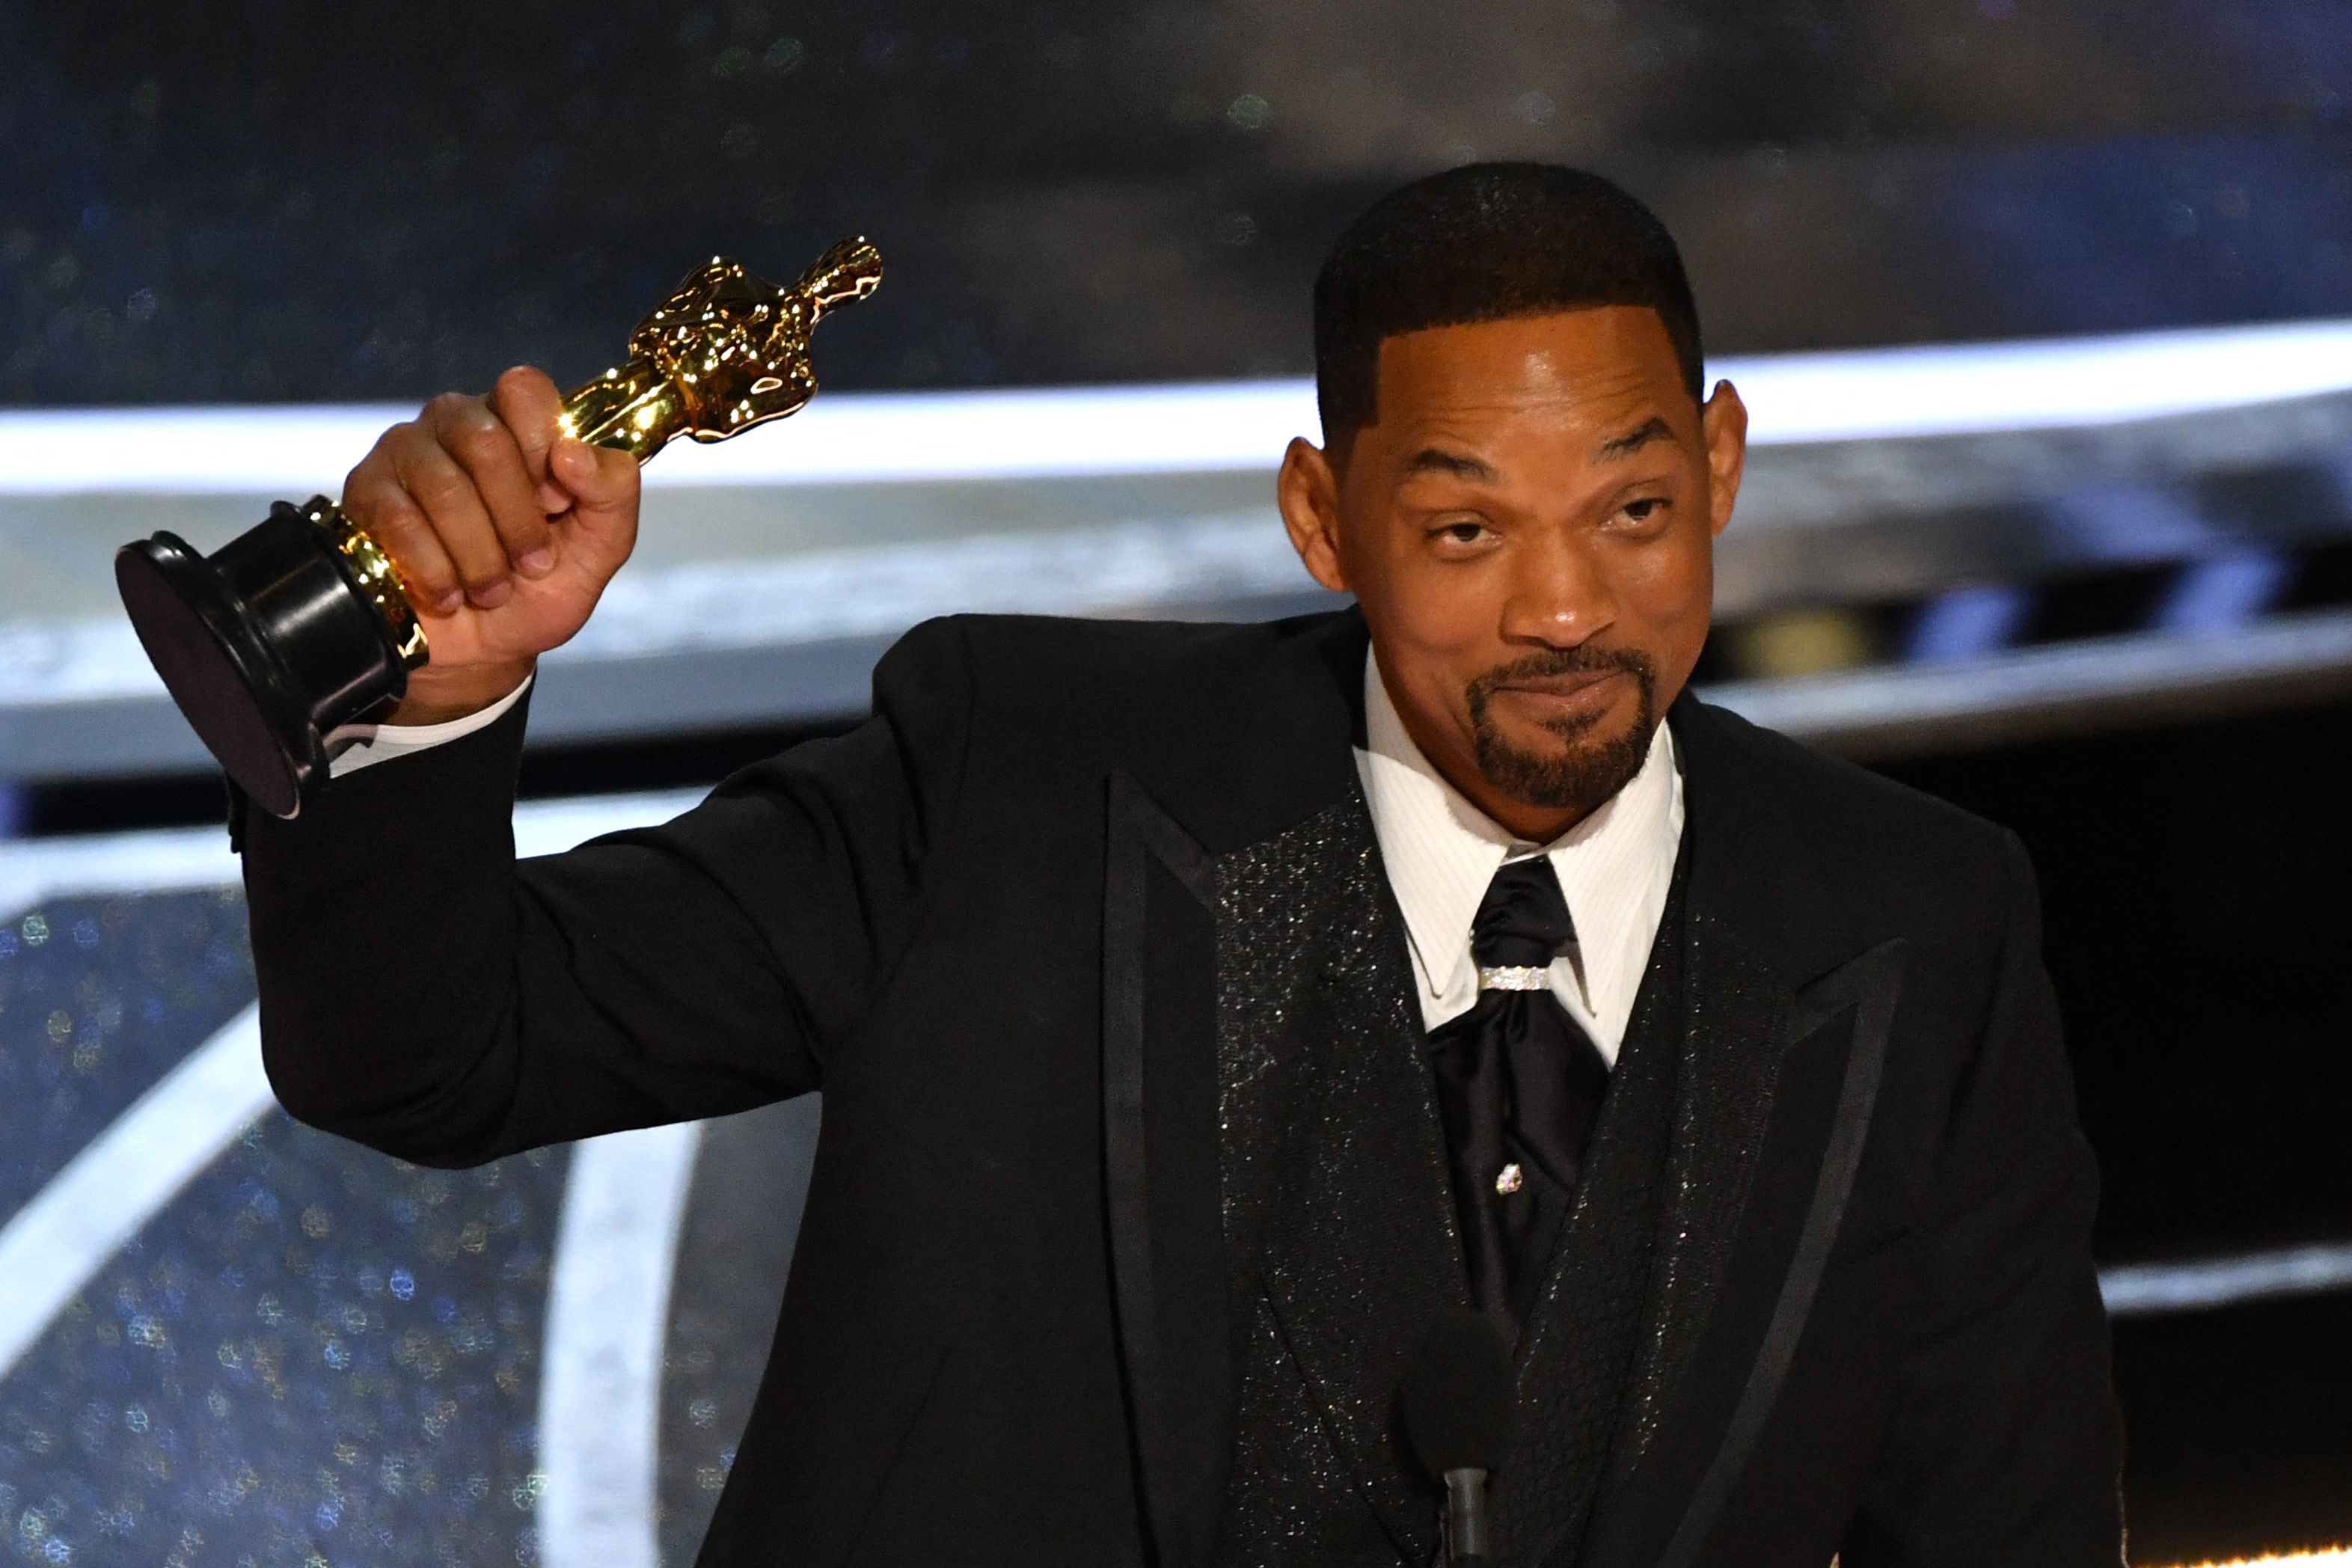 Will Smith accepts the Academy Award for Best Actor for King Richard at the 94th Annual Oscars